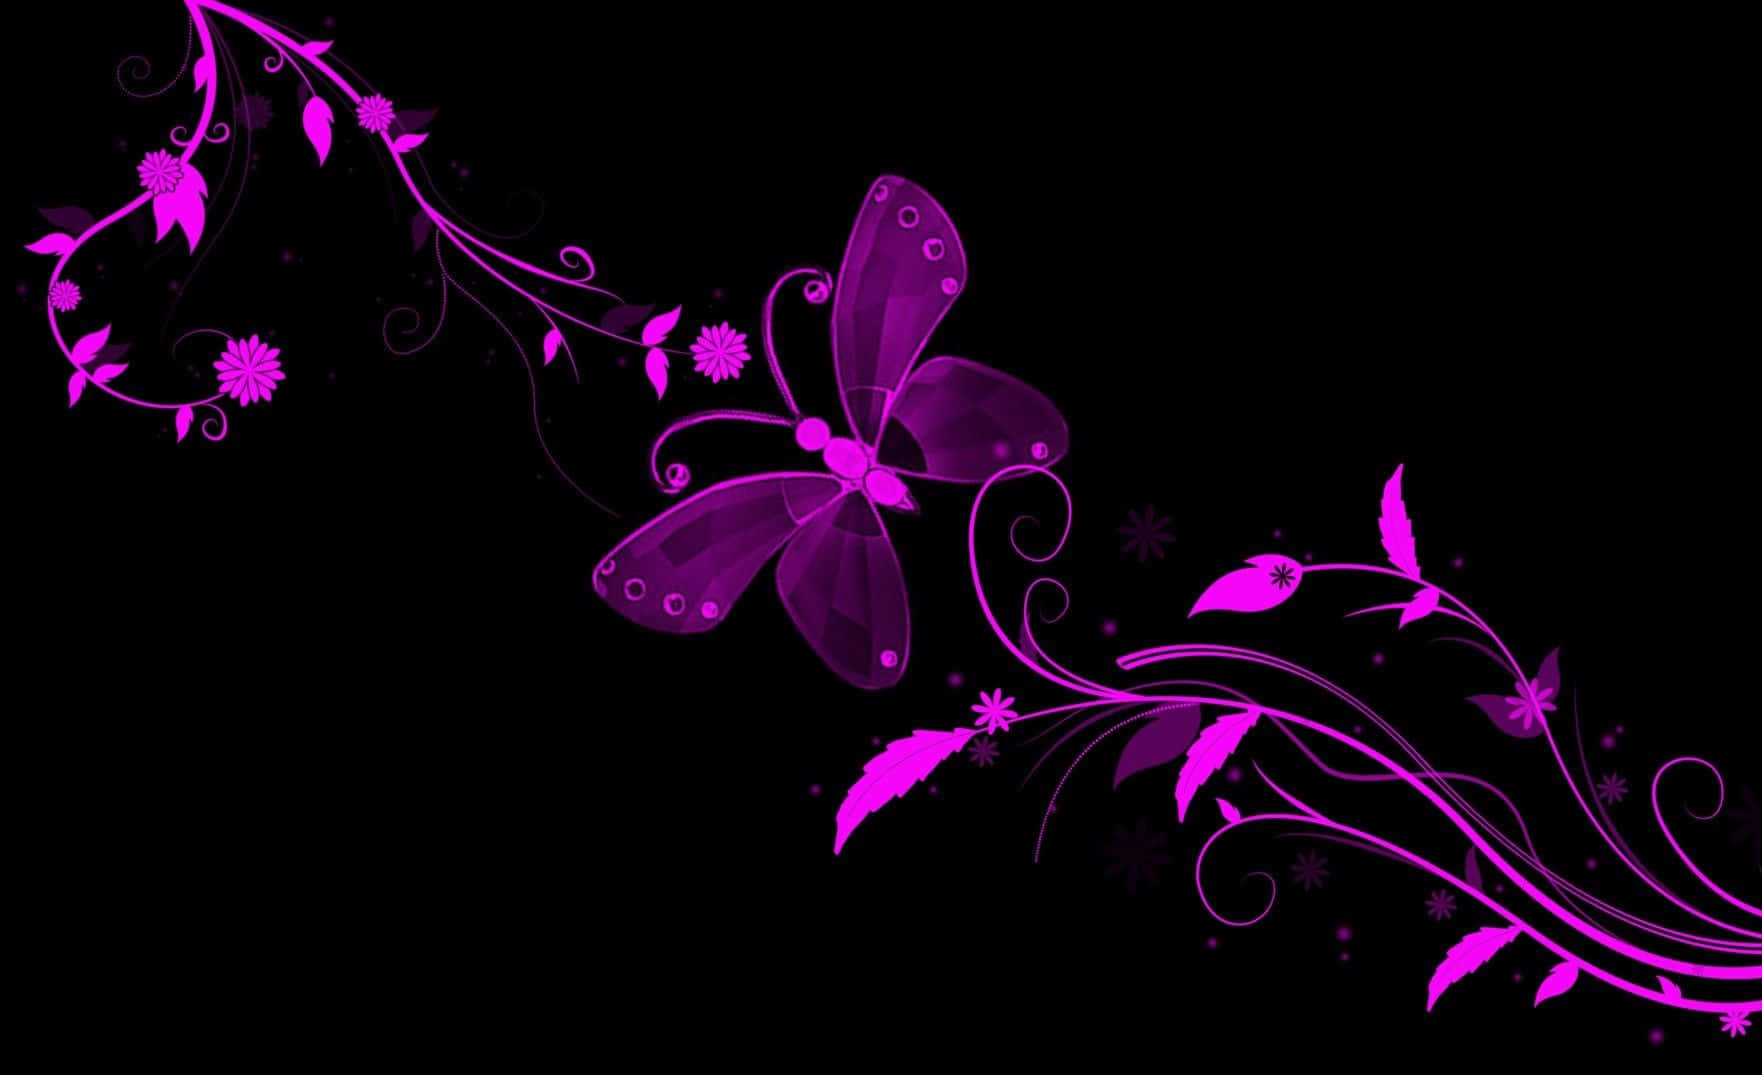 Mysterious Dark Butterfly on Abstract Background Wallpaper